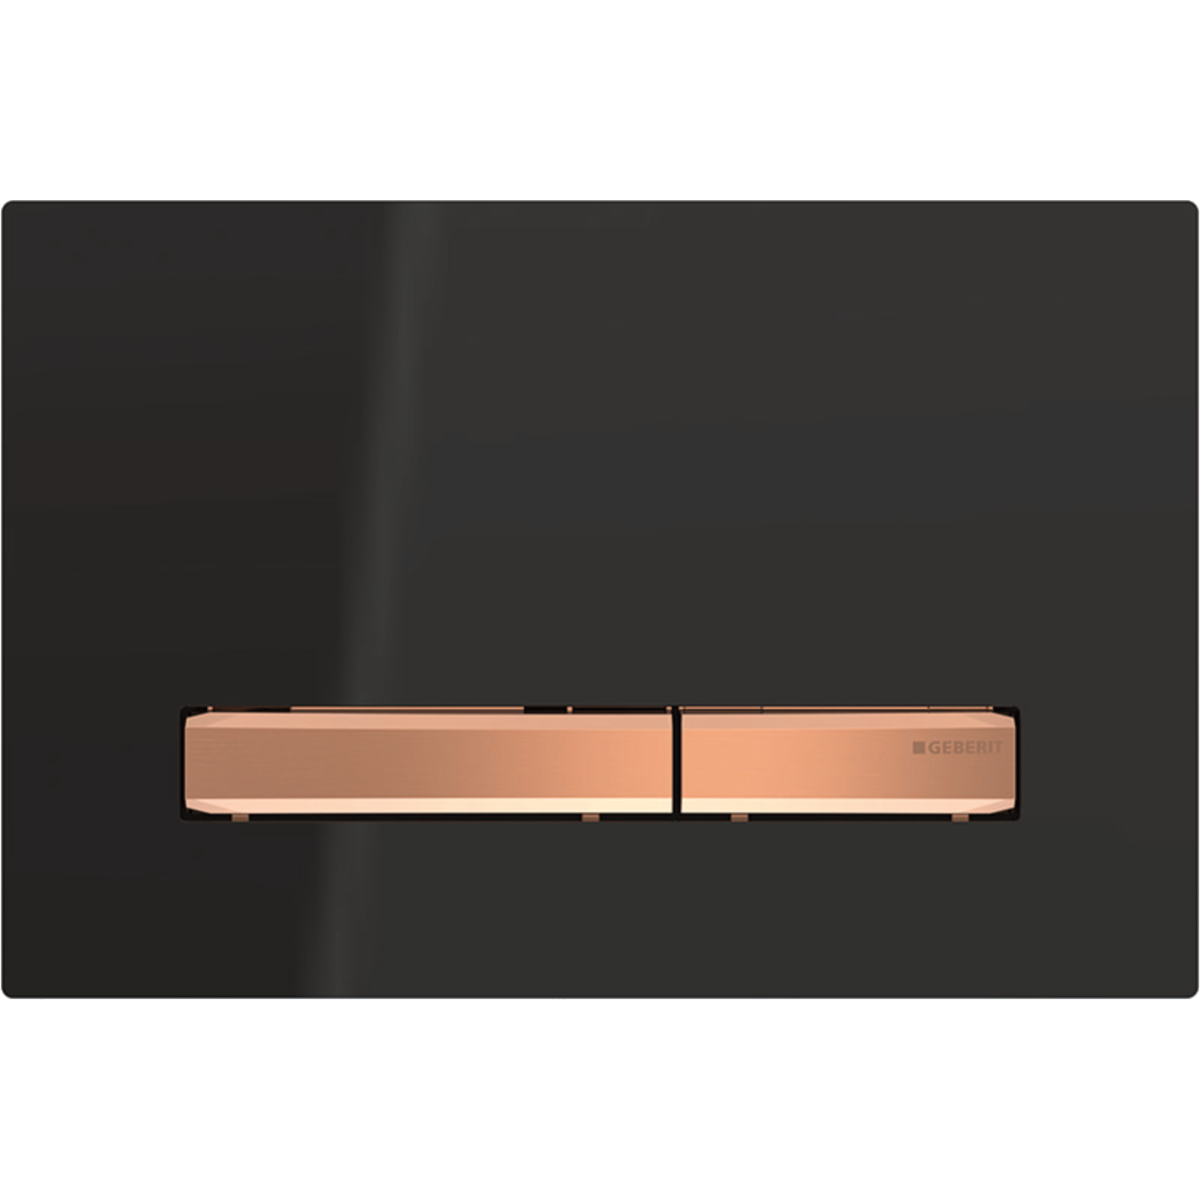 Geberit 115.670.DW.2 Actuator Plate Sigma50 for Dual Flush, Metal Colour Red Gold - Base Plate and Buttons: Red Gold/Cover Plate: Black